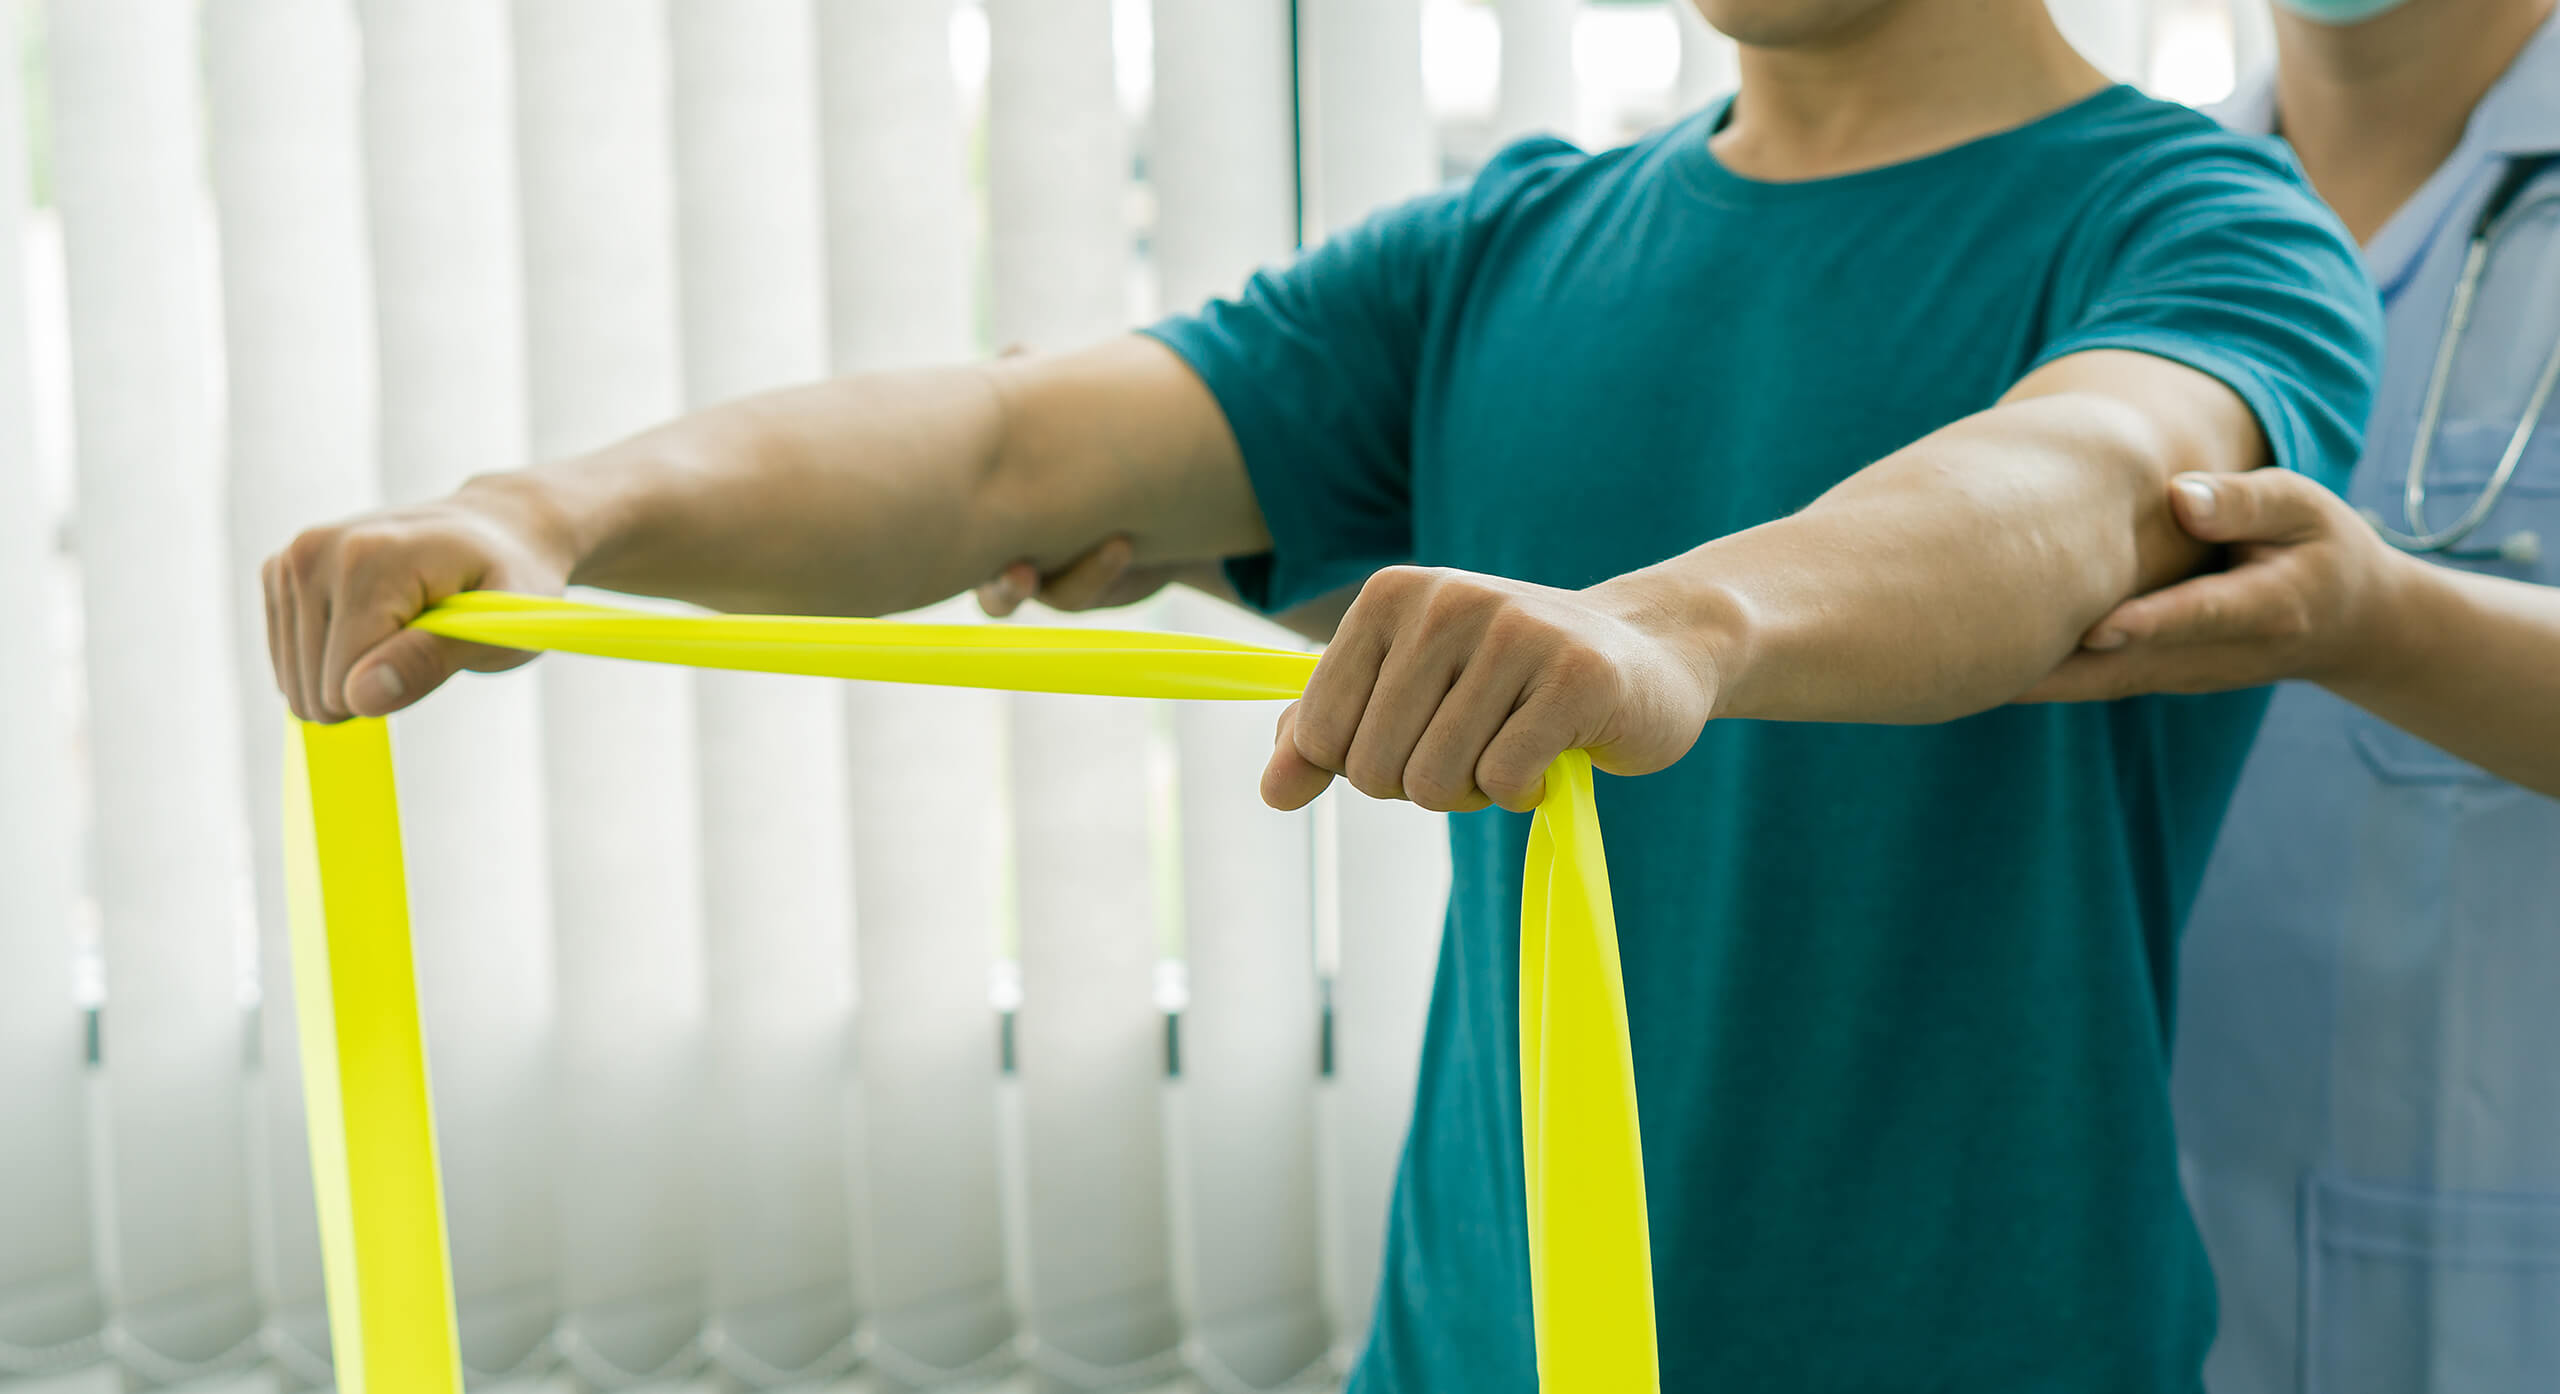 A man uses a resistance band during physical therapy for his shoulders.